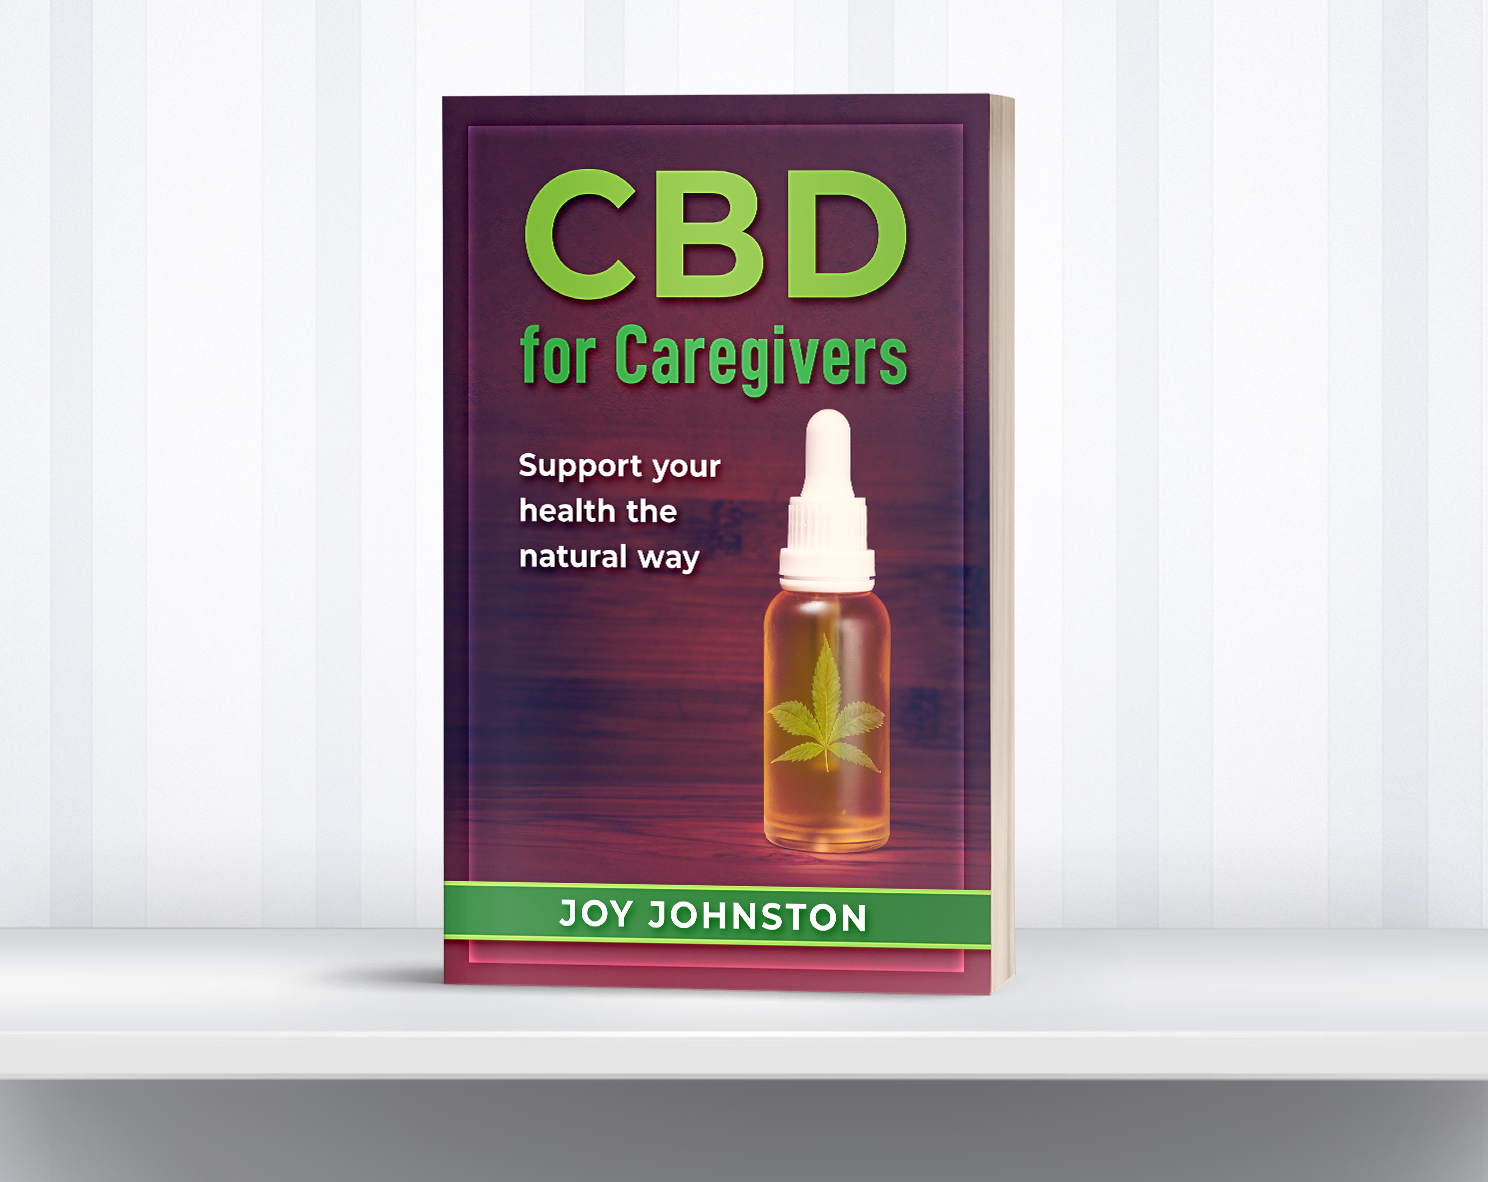 CBD for Caregivers book is now available!